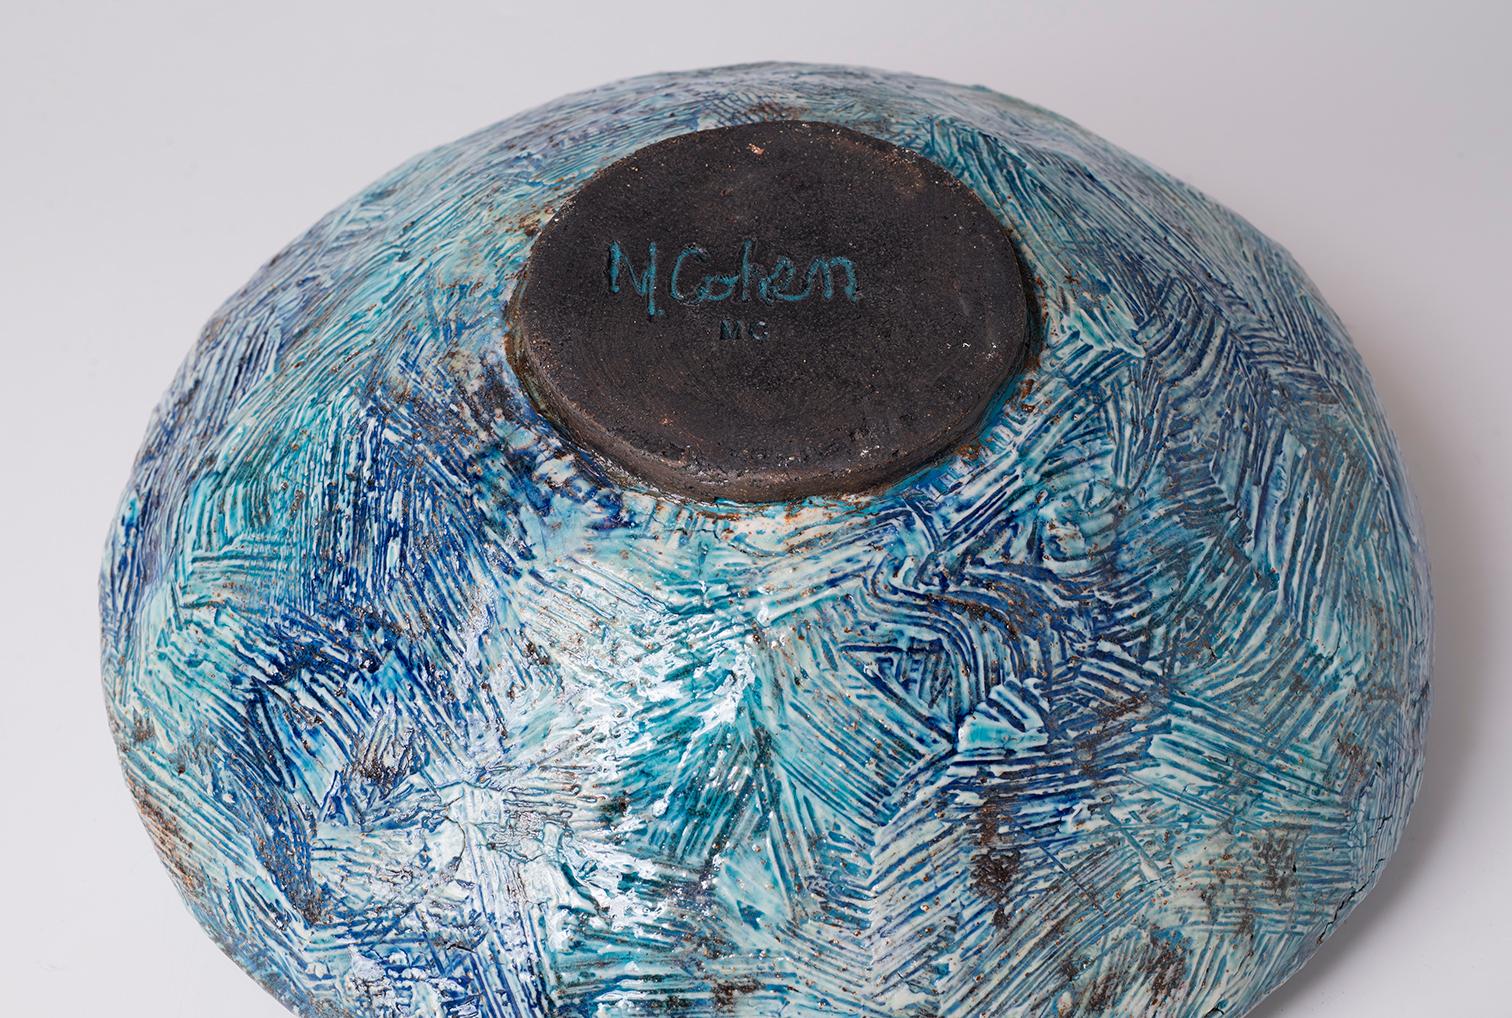 Slab built vessel with applied porcelain slip. Hand rubbed with blues and turquoise under glaze. Finished with a transparent turquoise glaze. Off white liner glaze inside.

About the Artist Marc Cohen
I love the raw and earthy properties of clay.